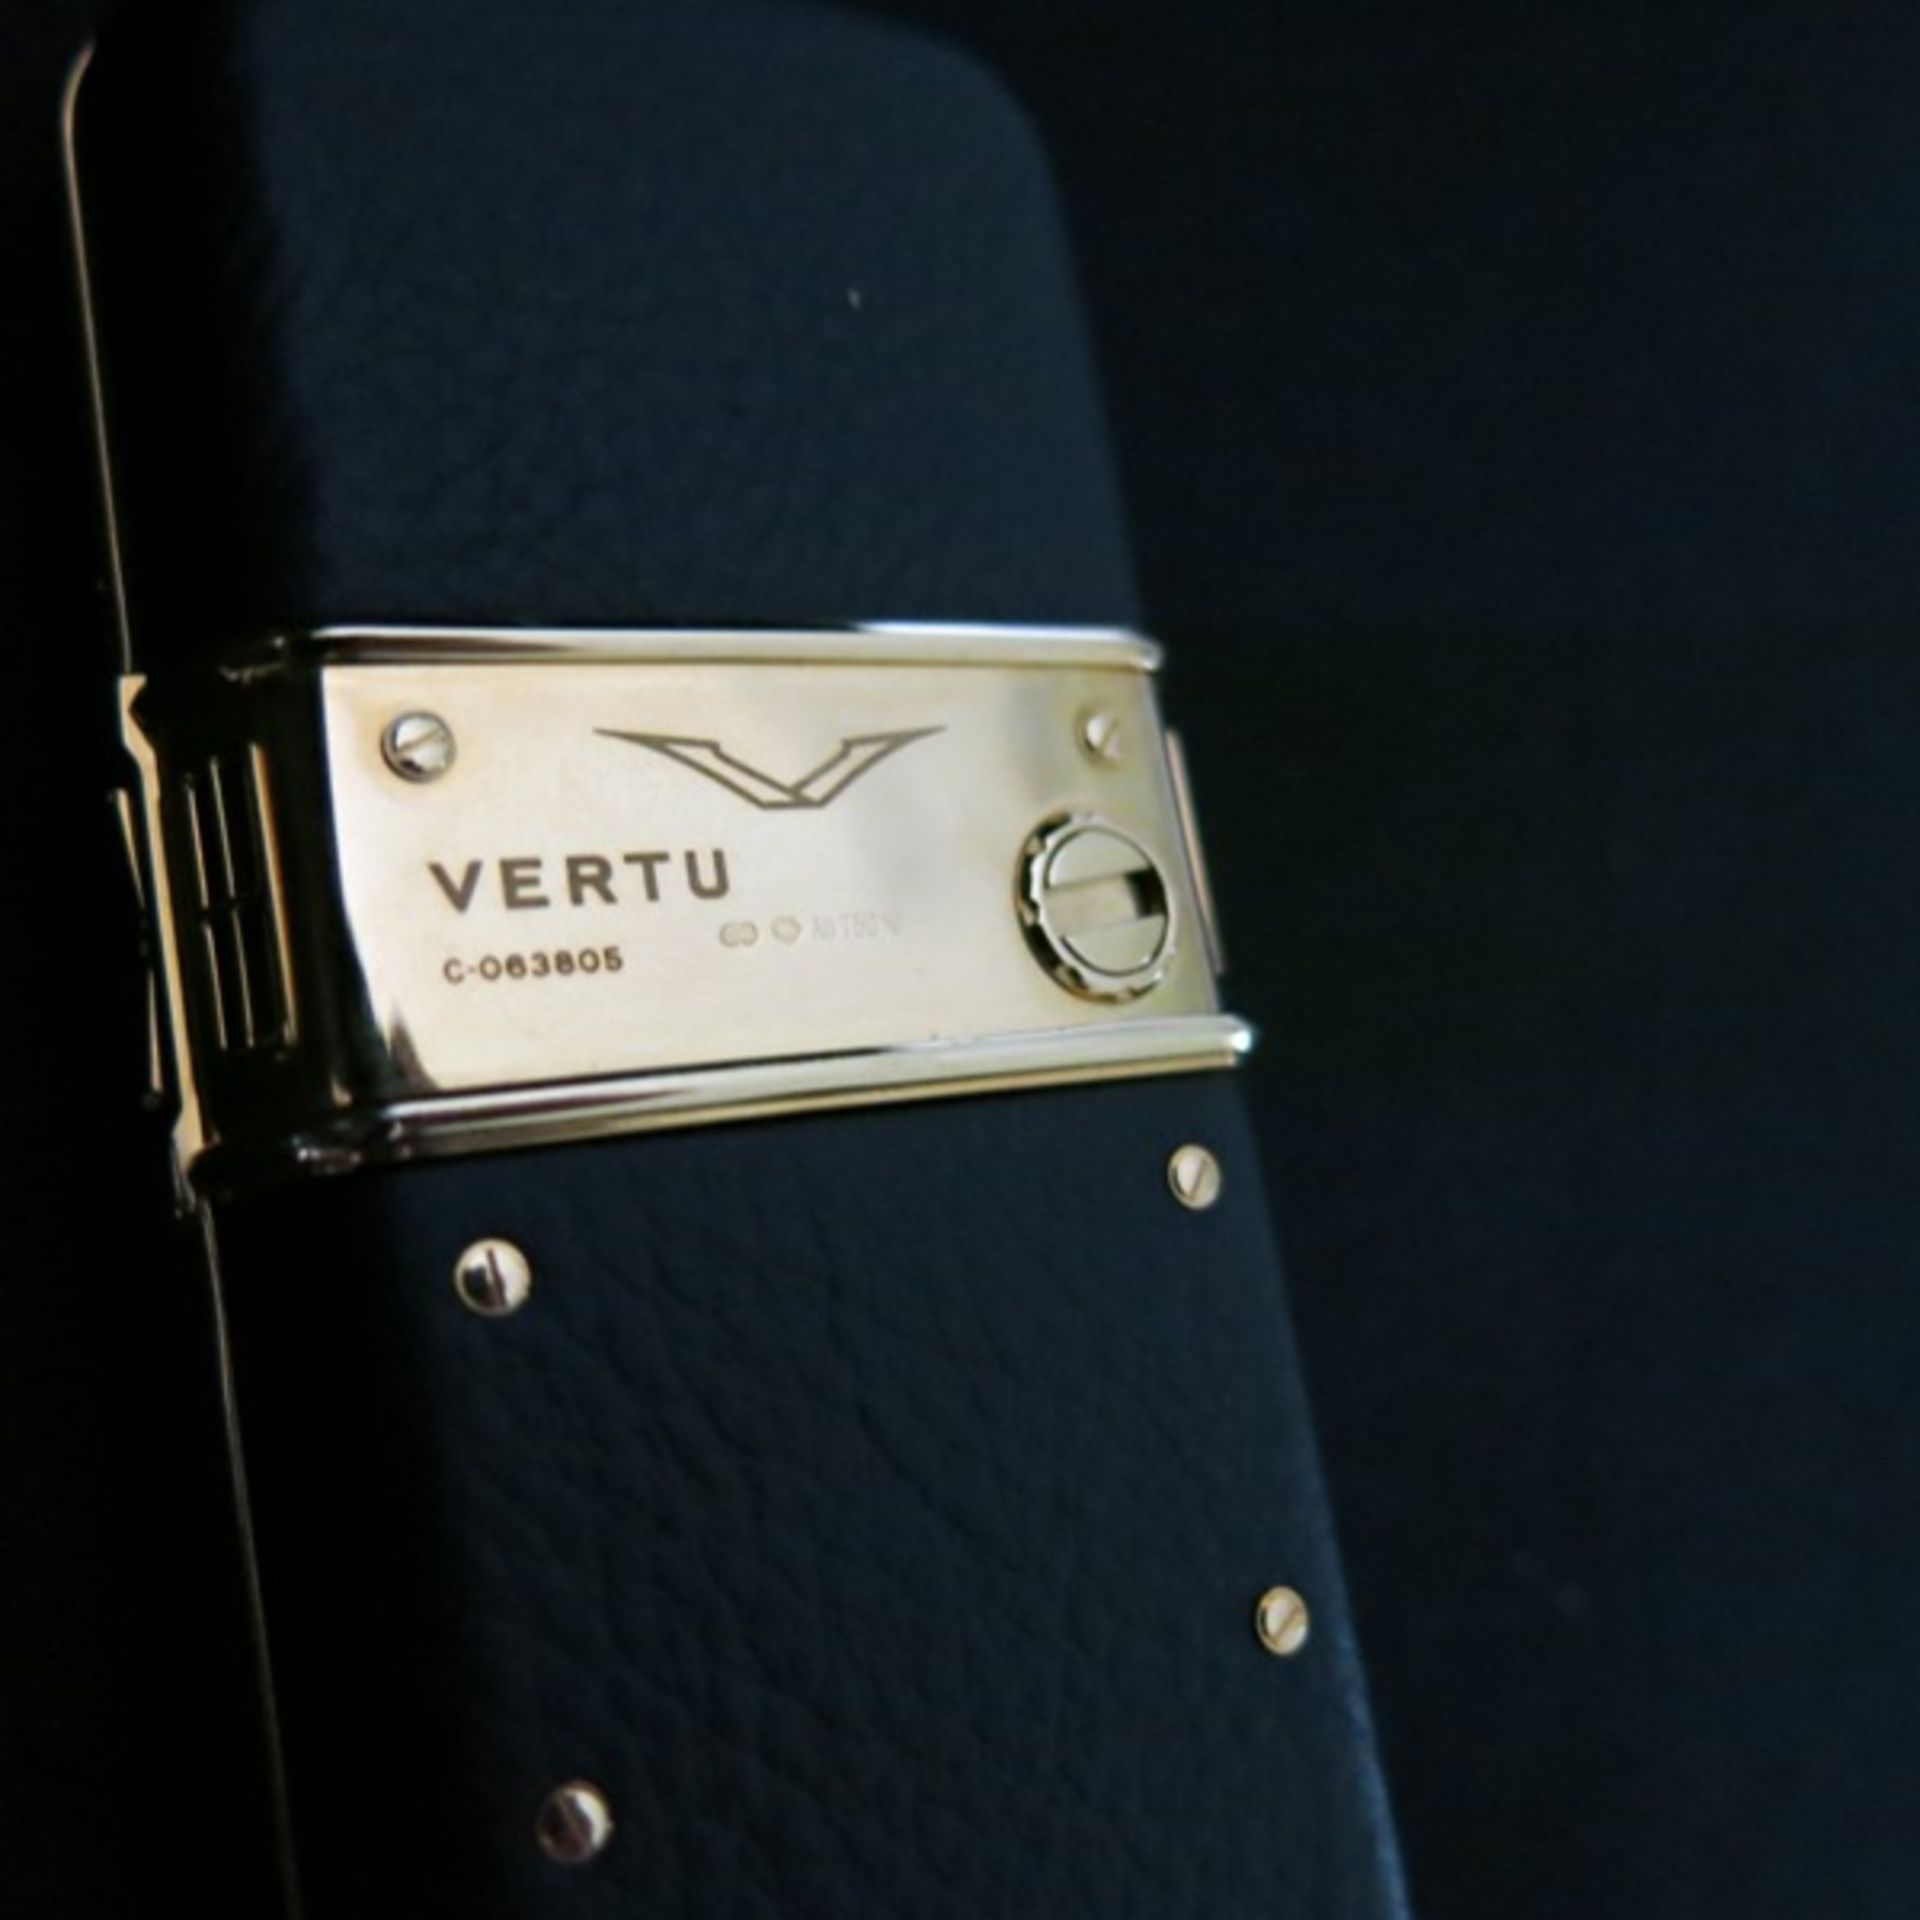 Vertu Constellation Classic Phone with 18kt Yellow Gold & Diamond Trim Bezel, Back Plate, Select Key - Image 3 of 6